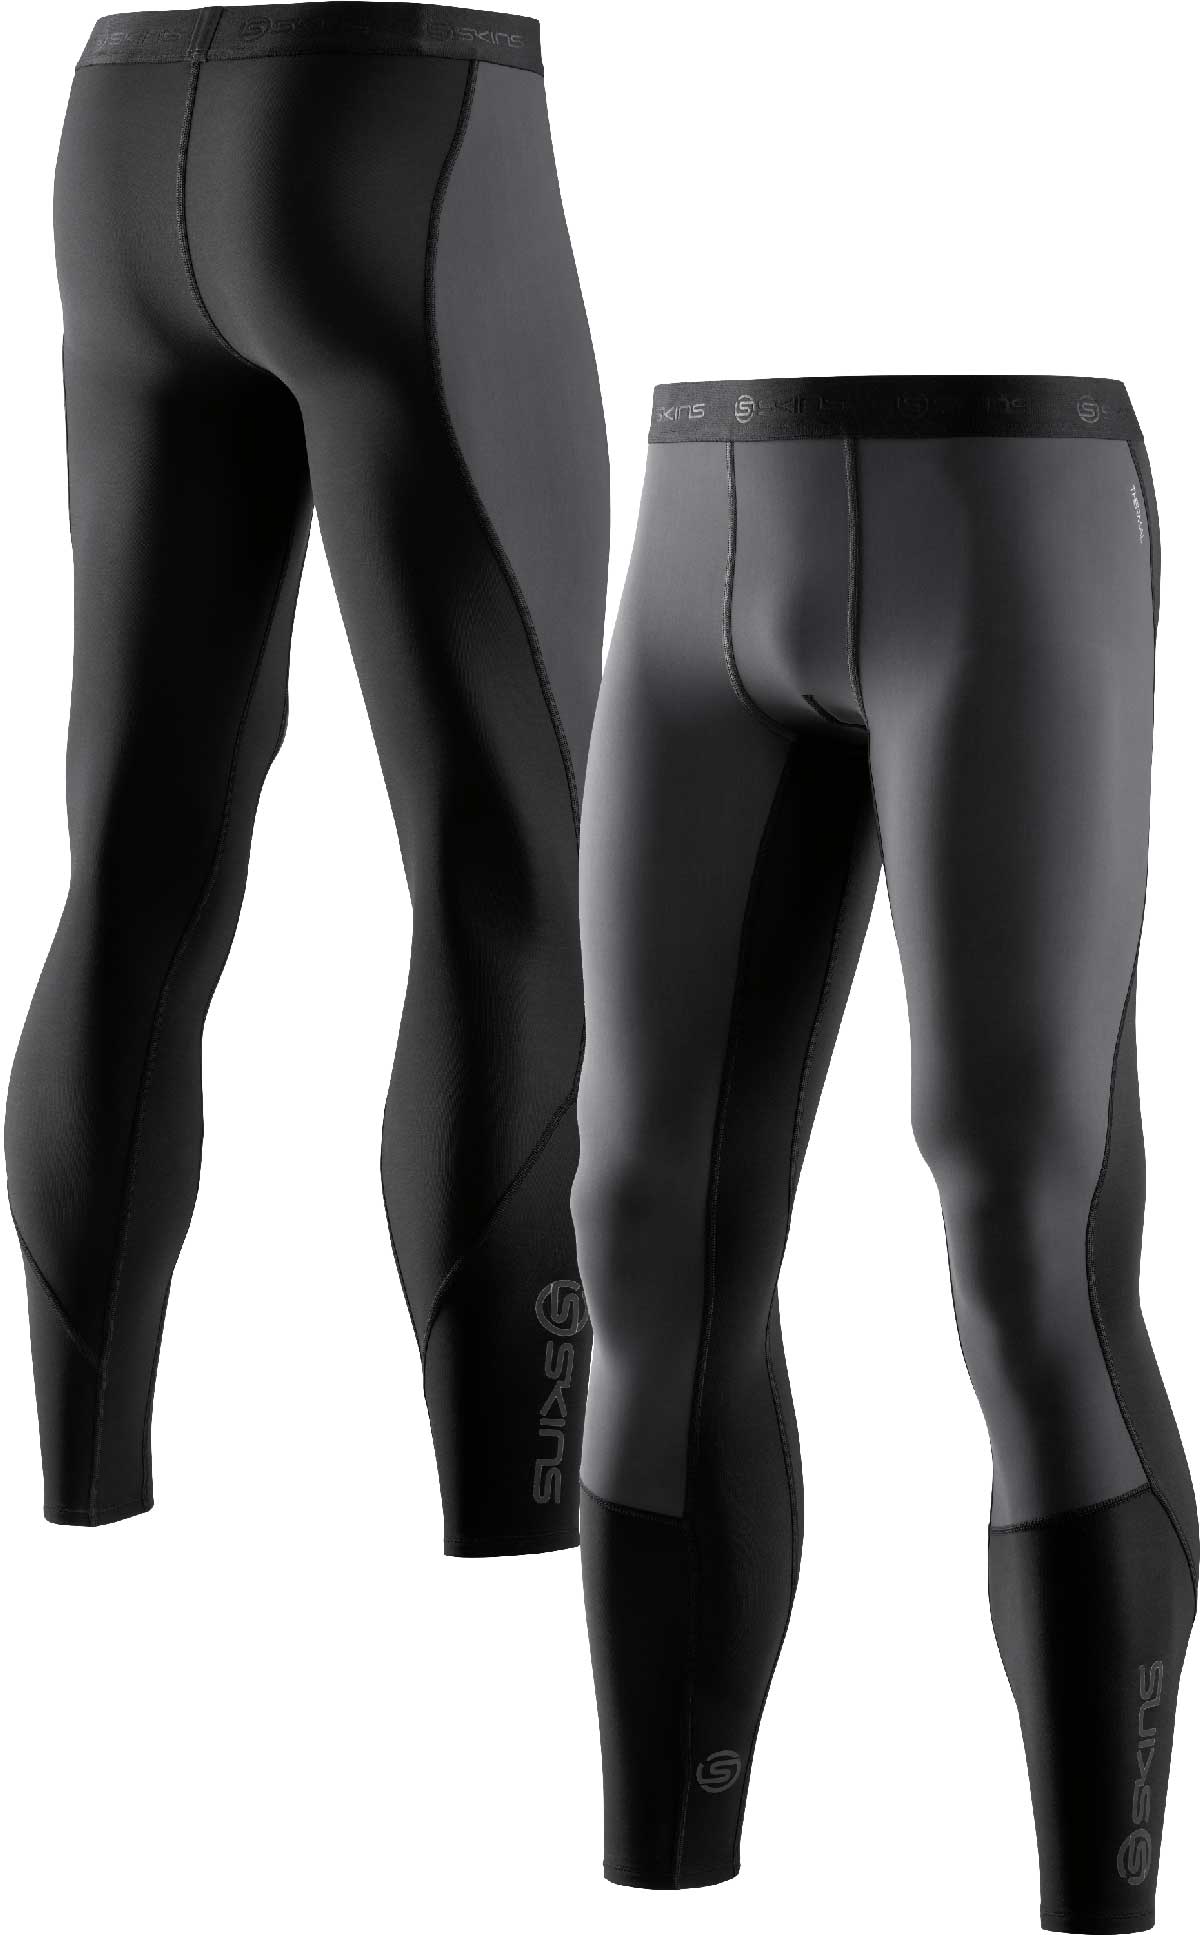 Collant Thermique Homme Militaire Thermo Performer -10°C > -20°C bleu